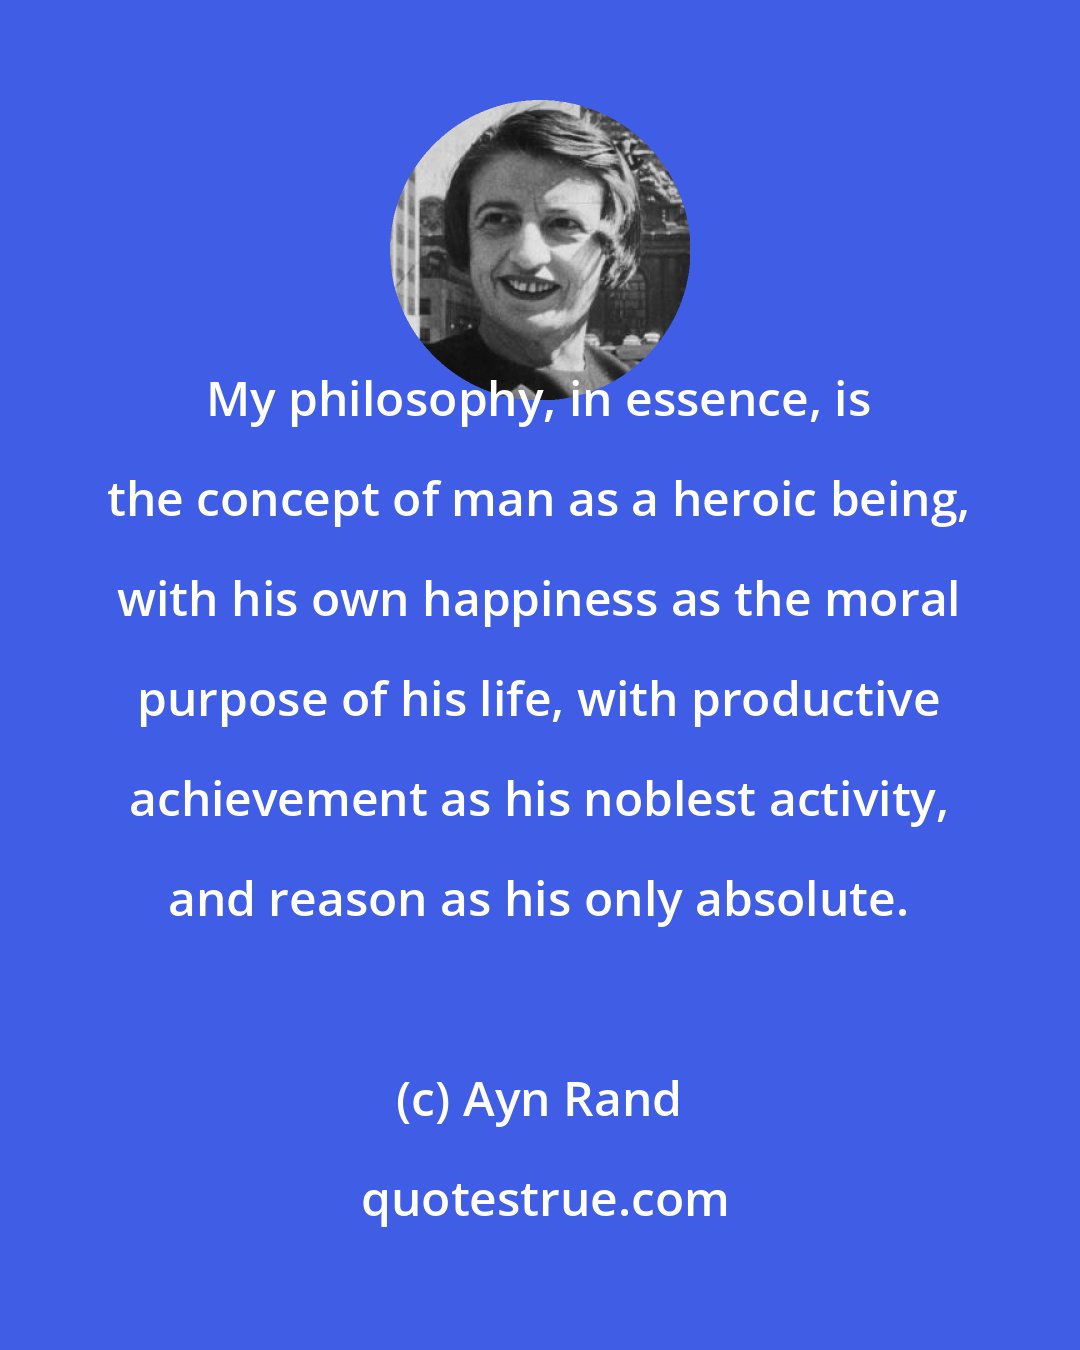 Ayn Rand: My philosophy, in essence, is the concept of man as a heroic being, with his own happiness as the moral purpose of his life, with productive achievement as his noblest activity, and reason as his only absolute.